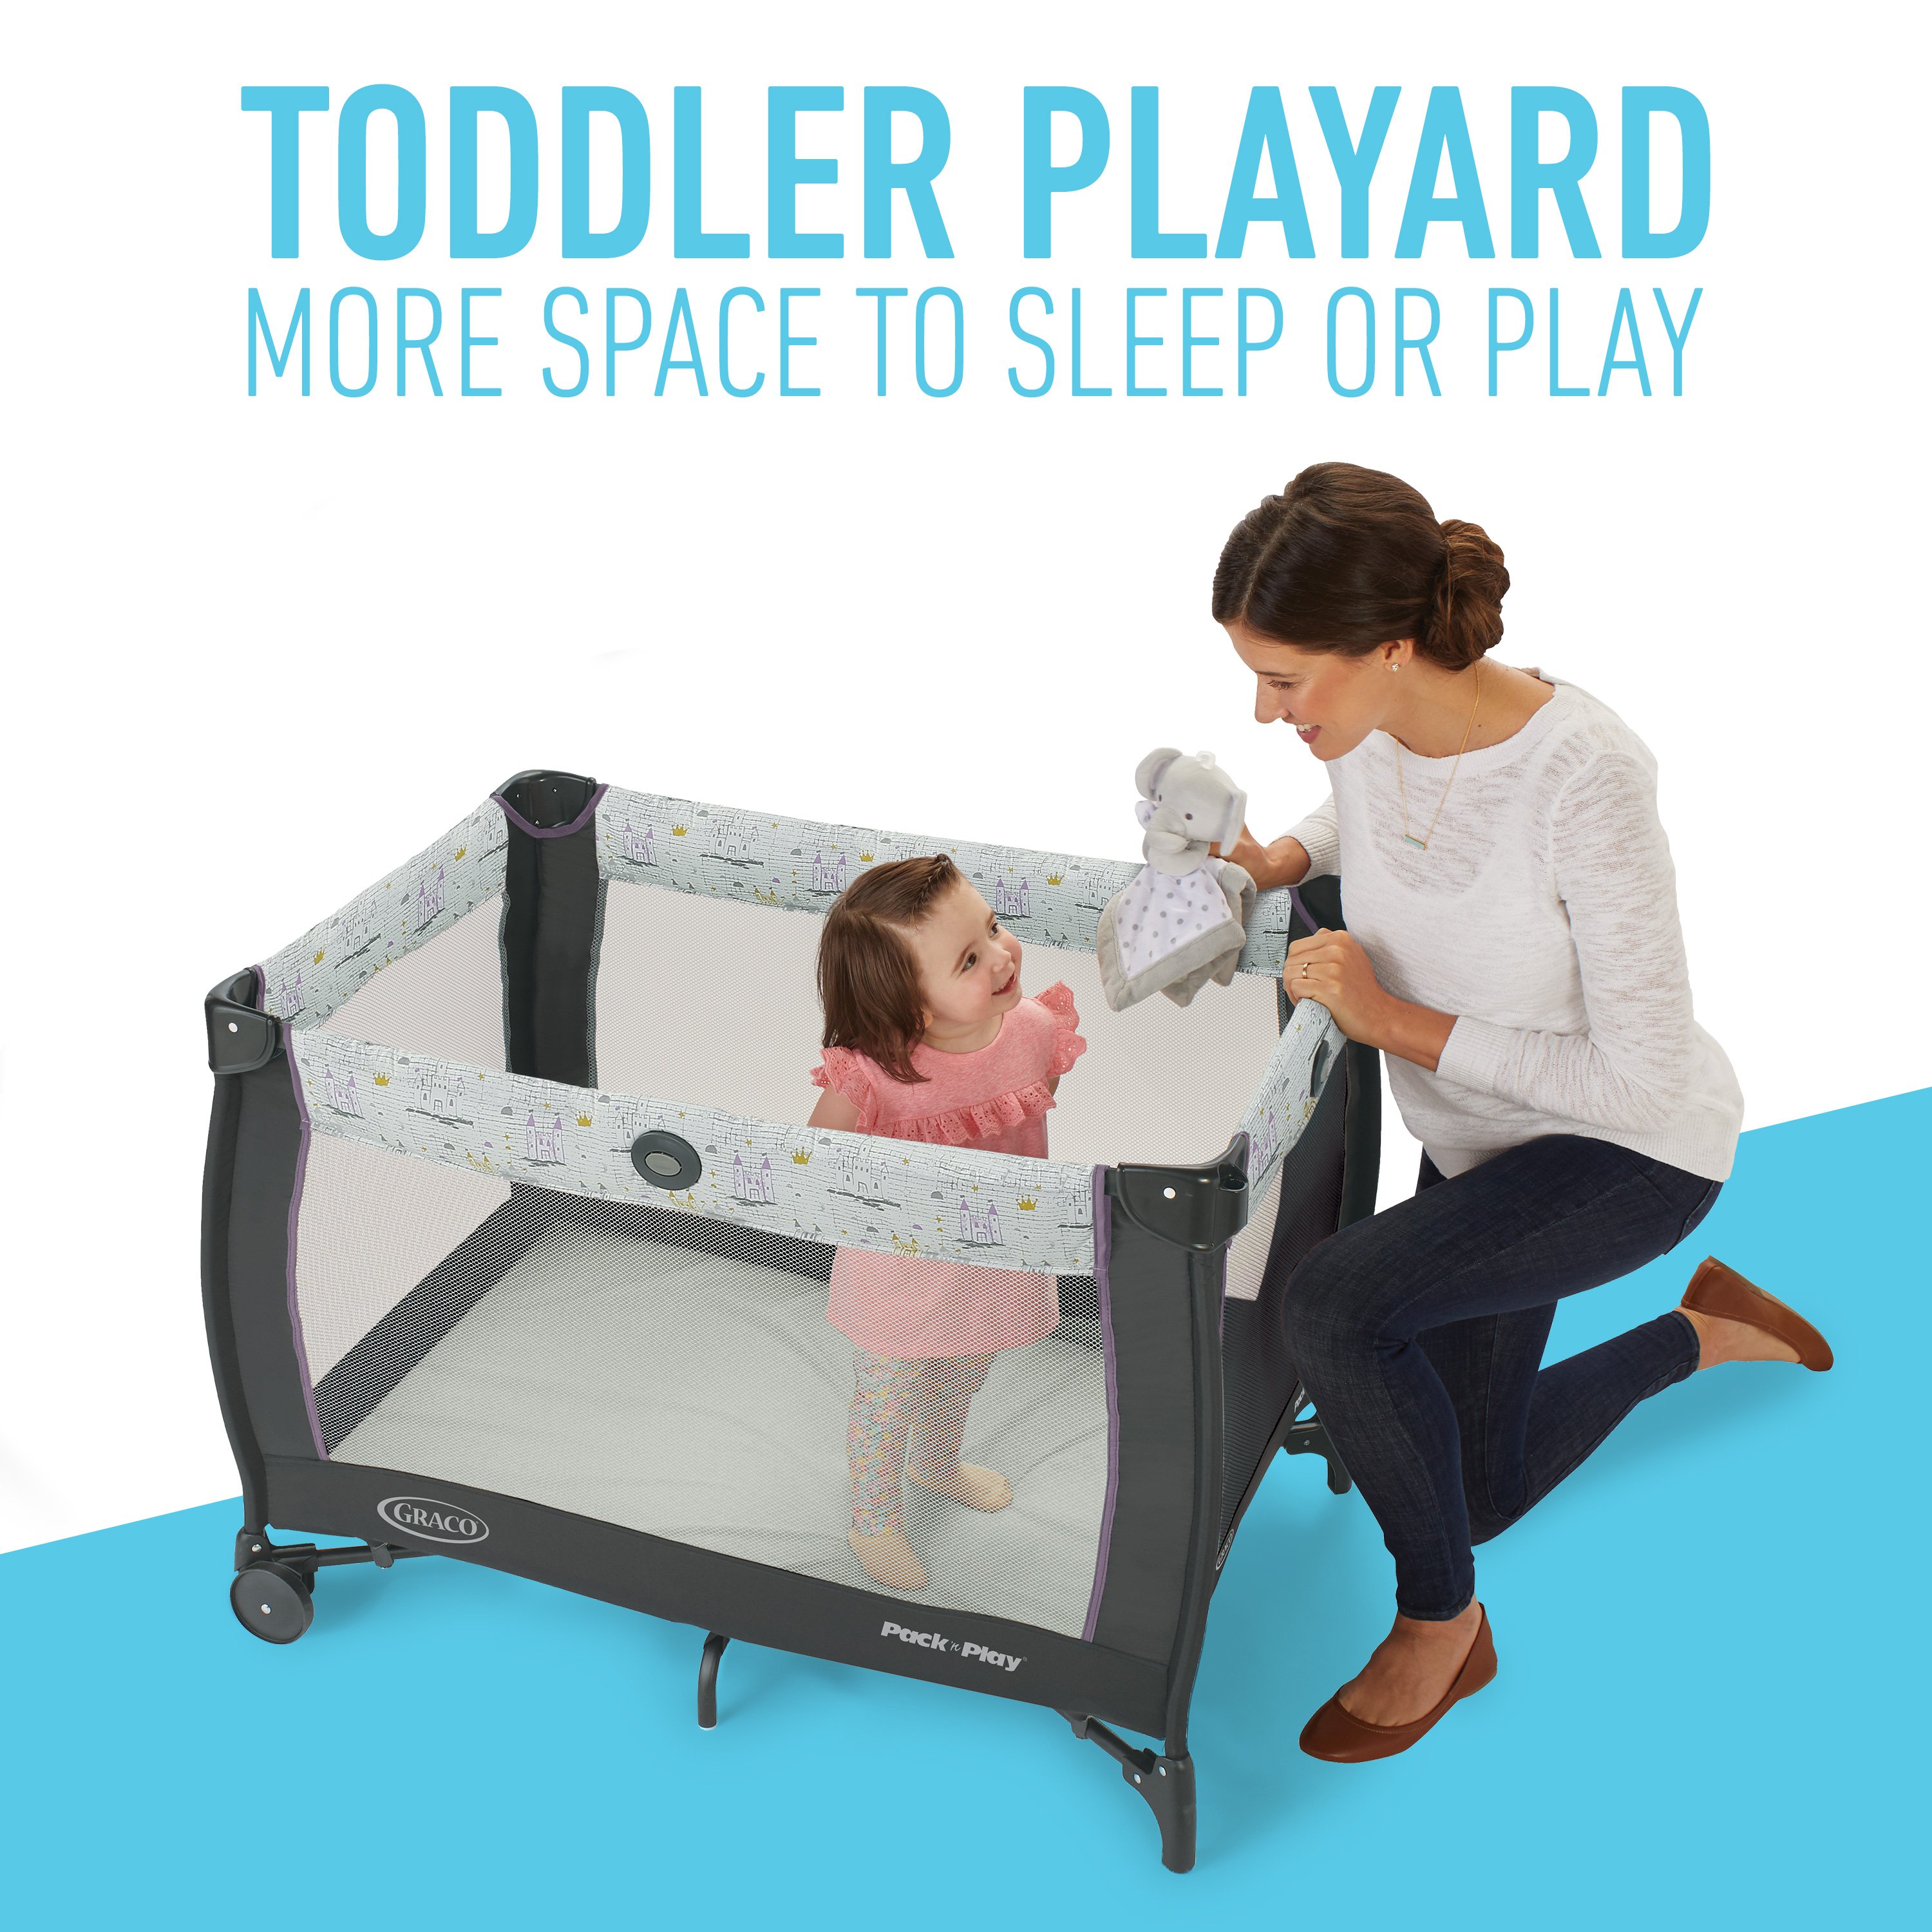 graco pack and play care suite